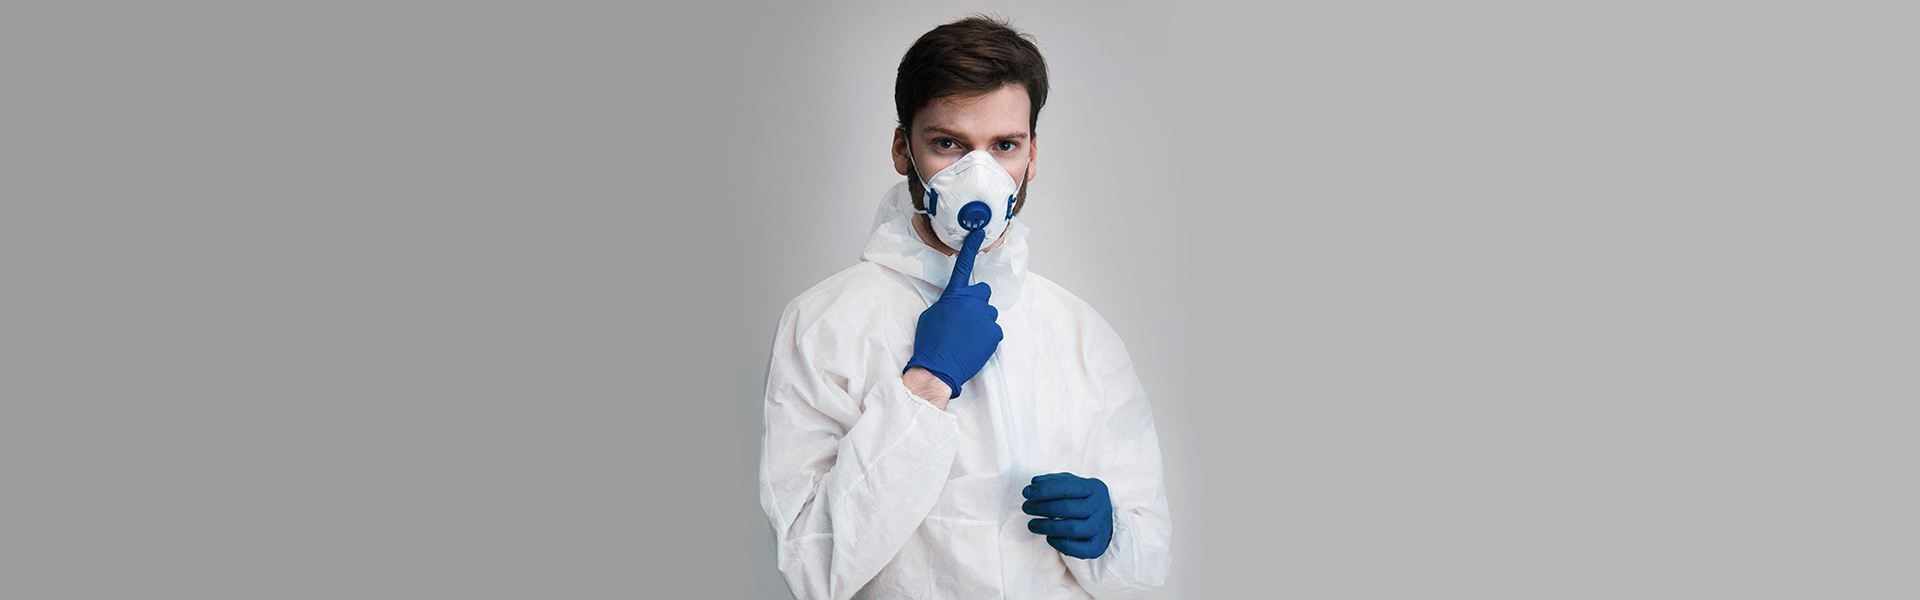 Should your dentist charge an extra fee for PPE supplies?